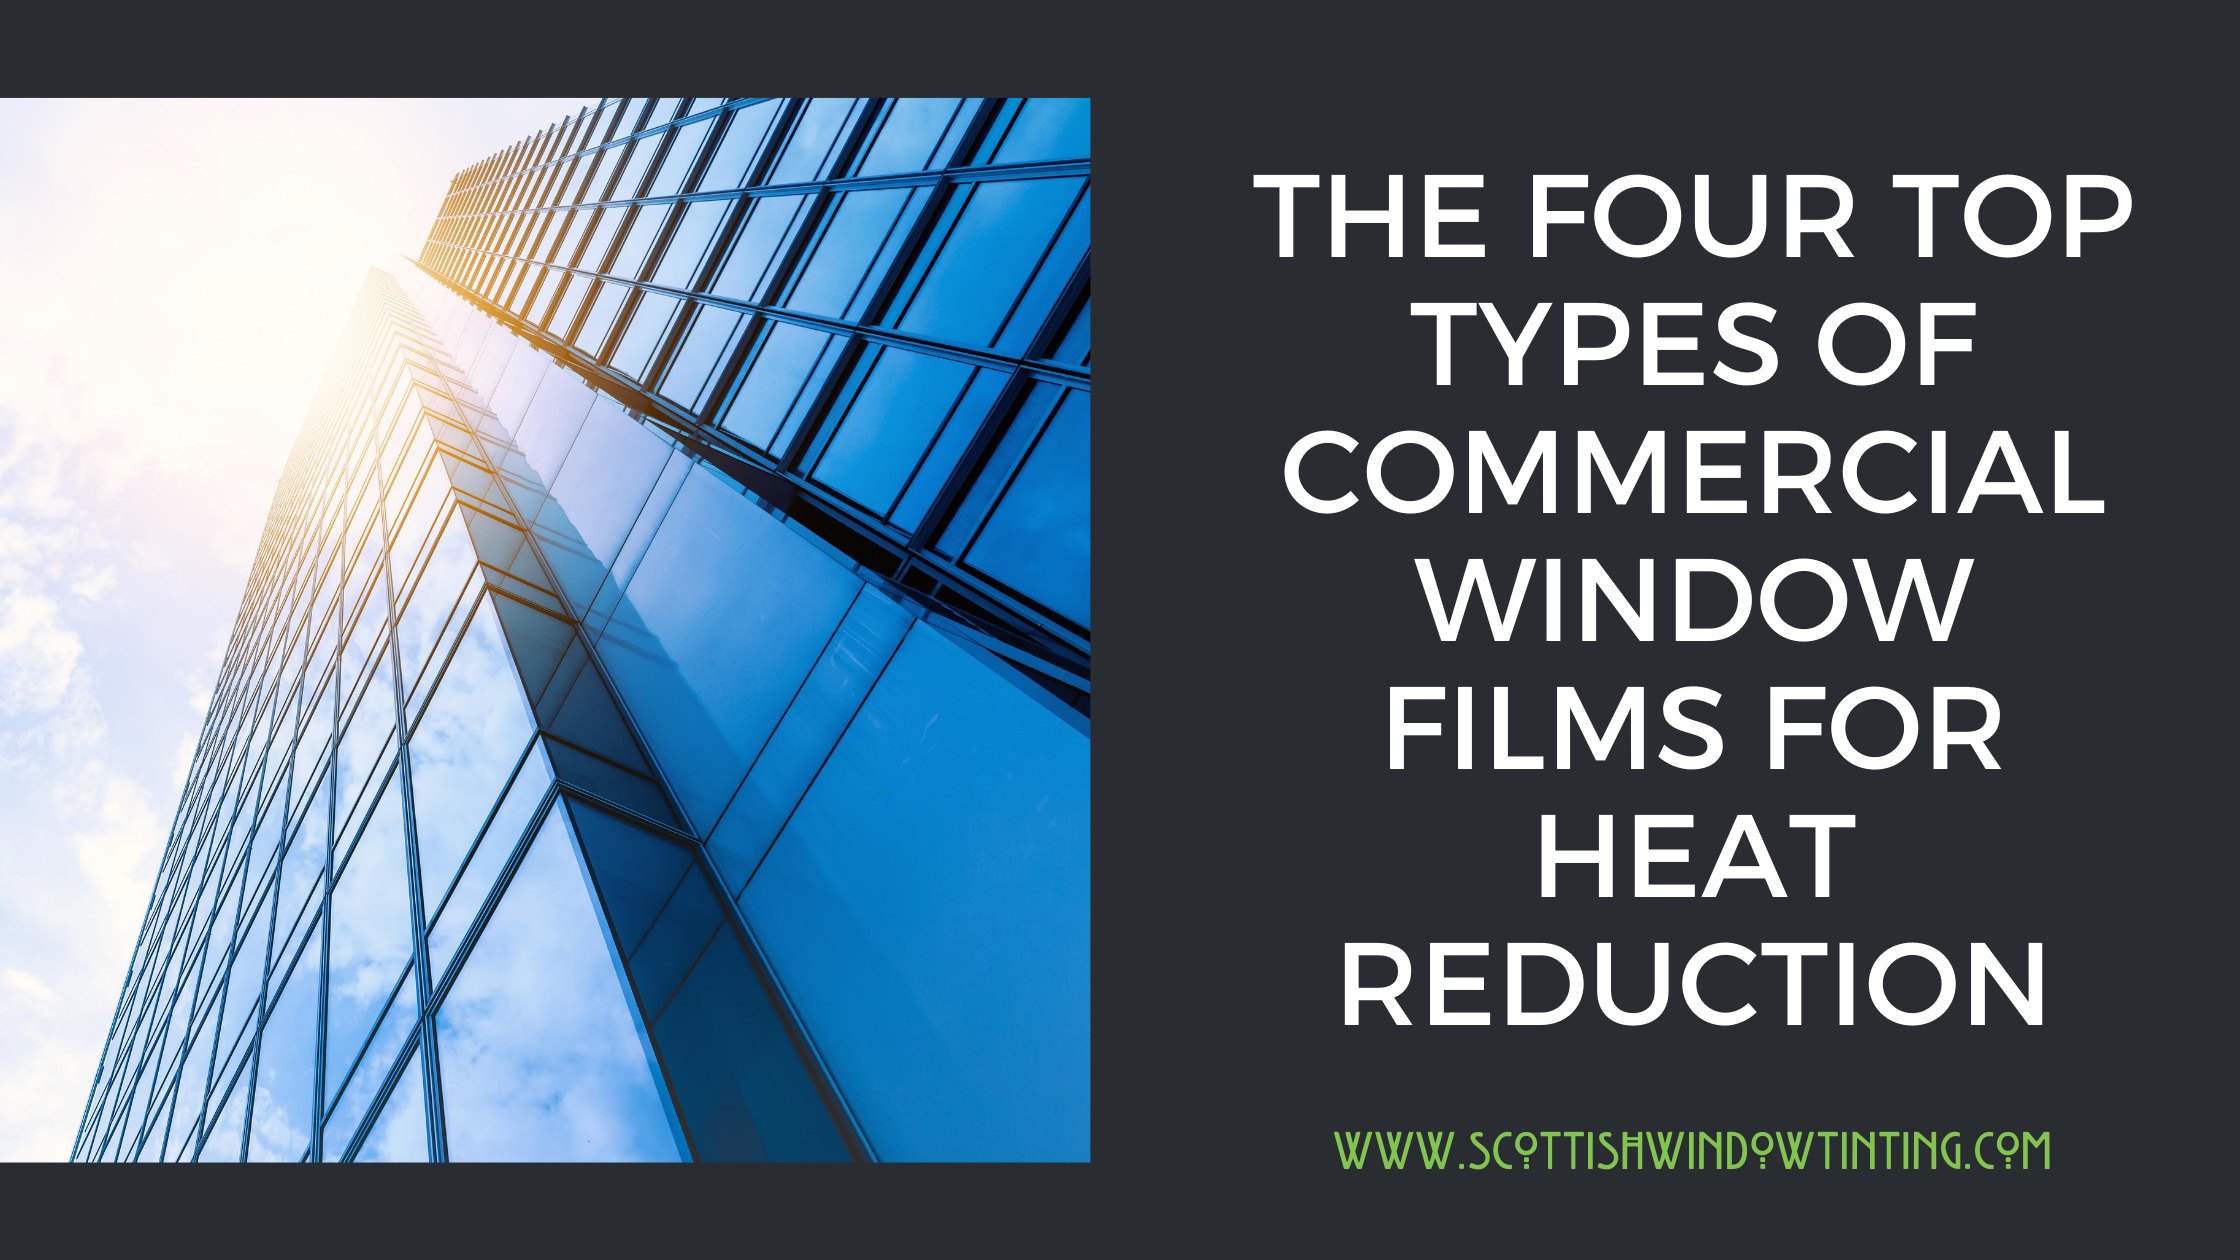 The Four Top Types of Commercial Window Films For Heat Reduction